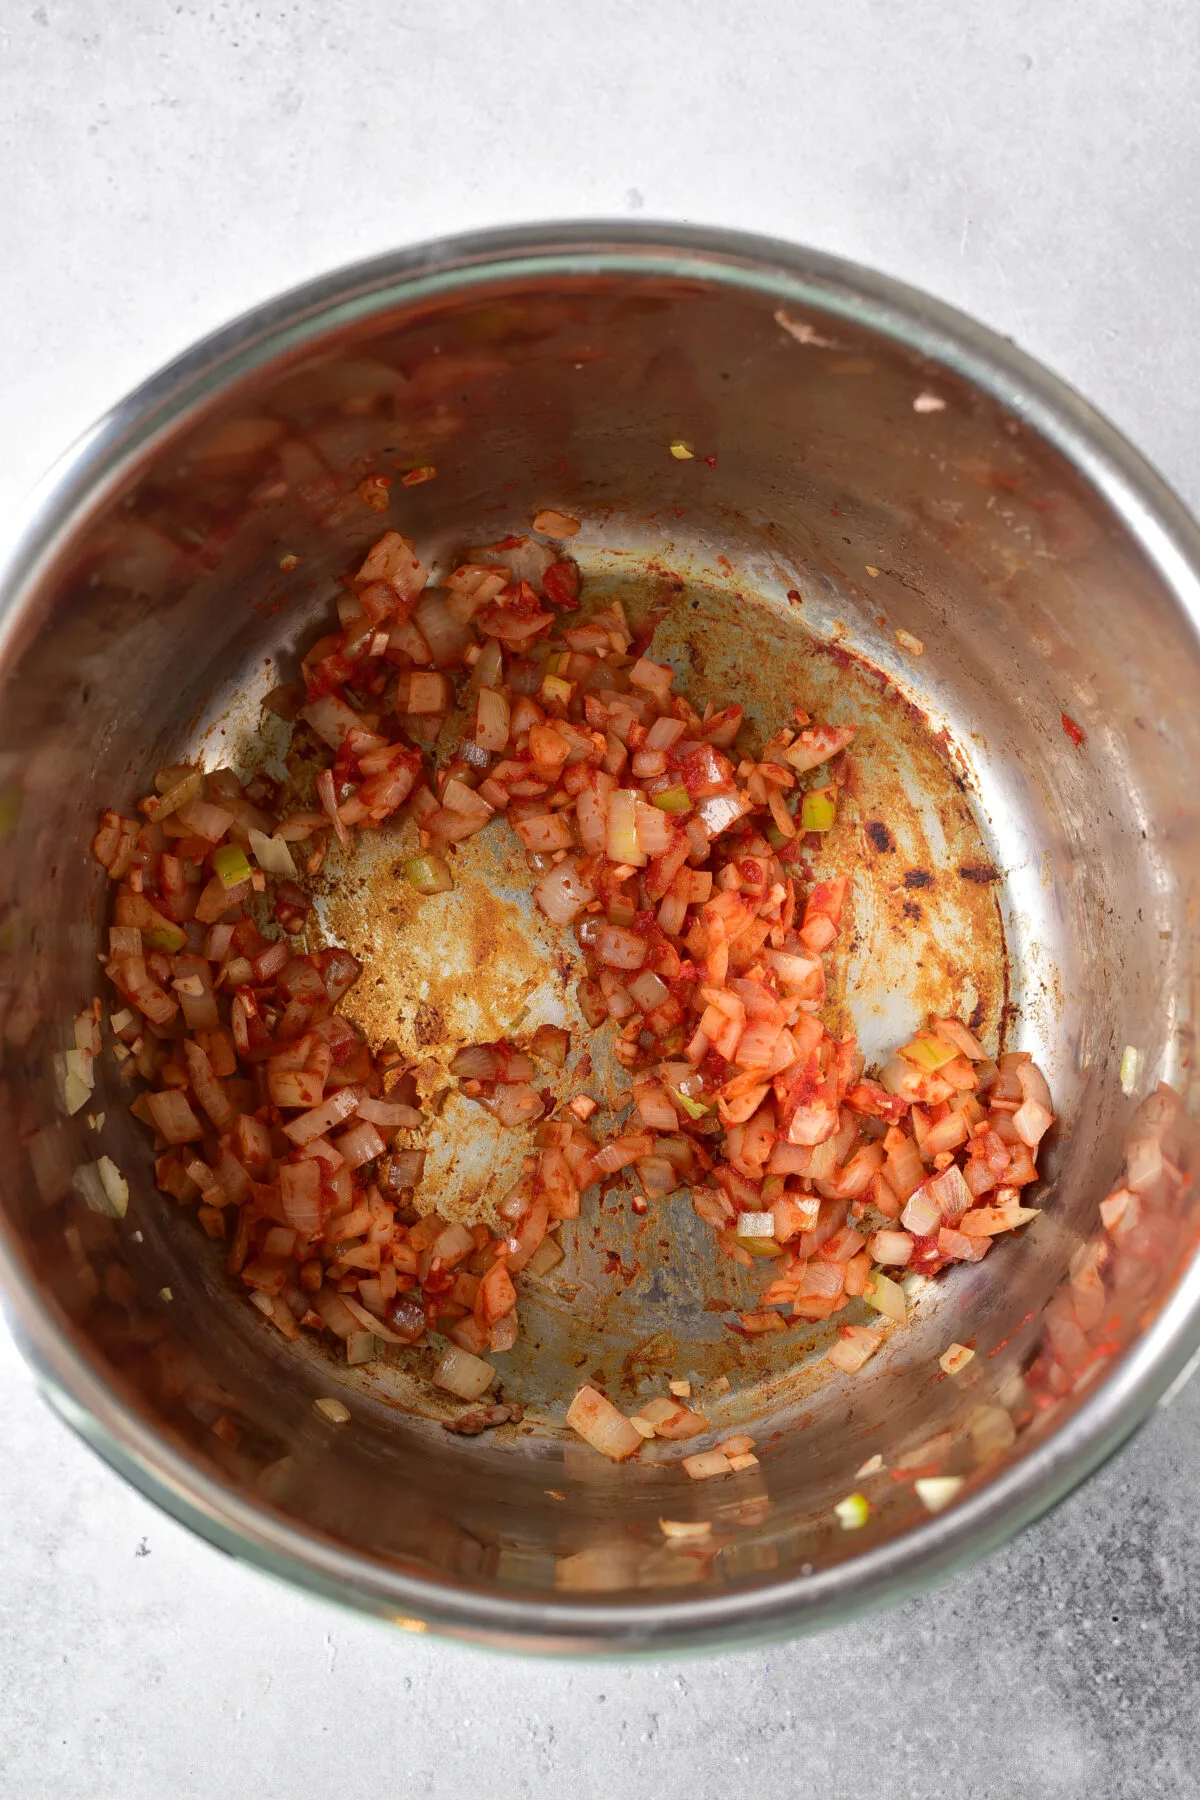 Tomato paste added to the onion and garlic in the instant pot.